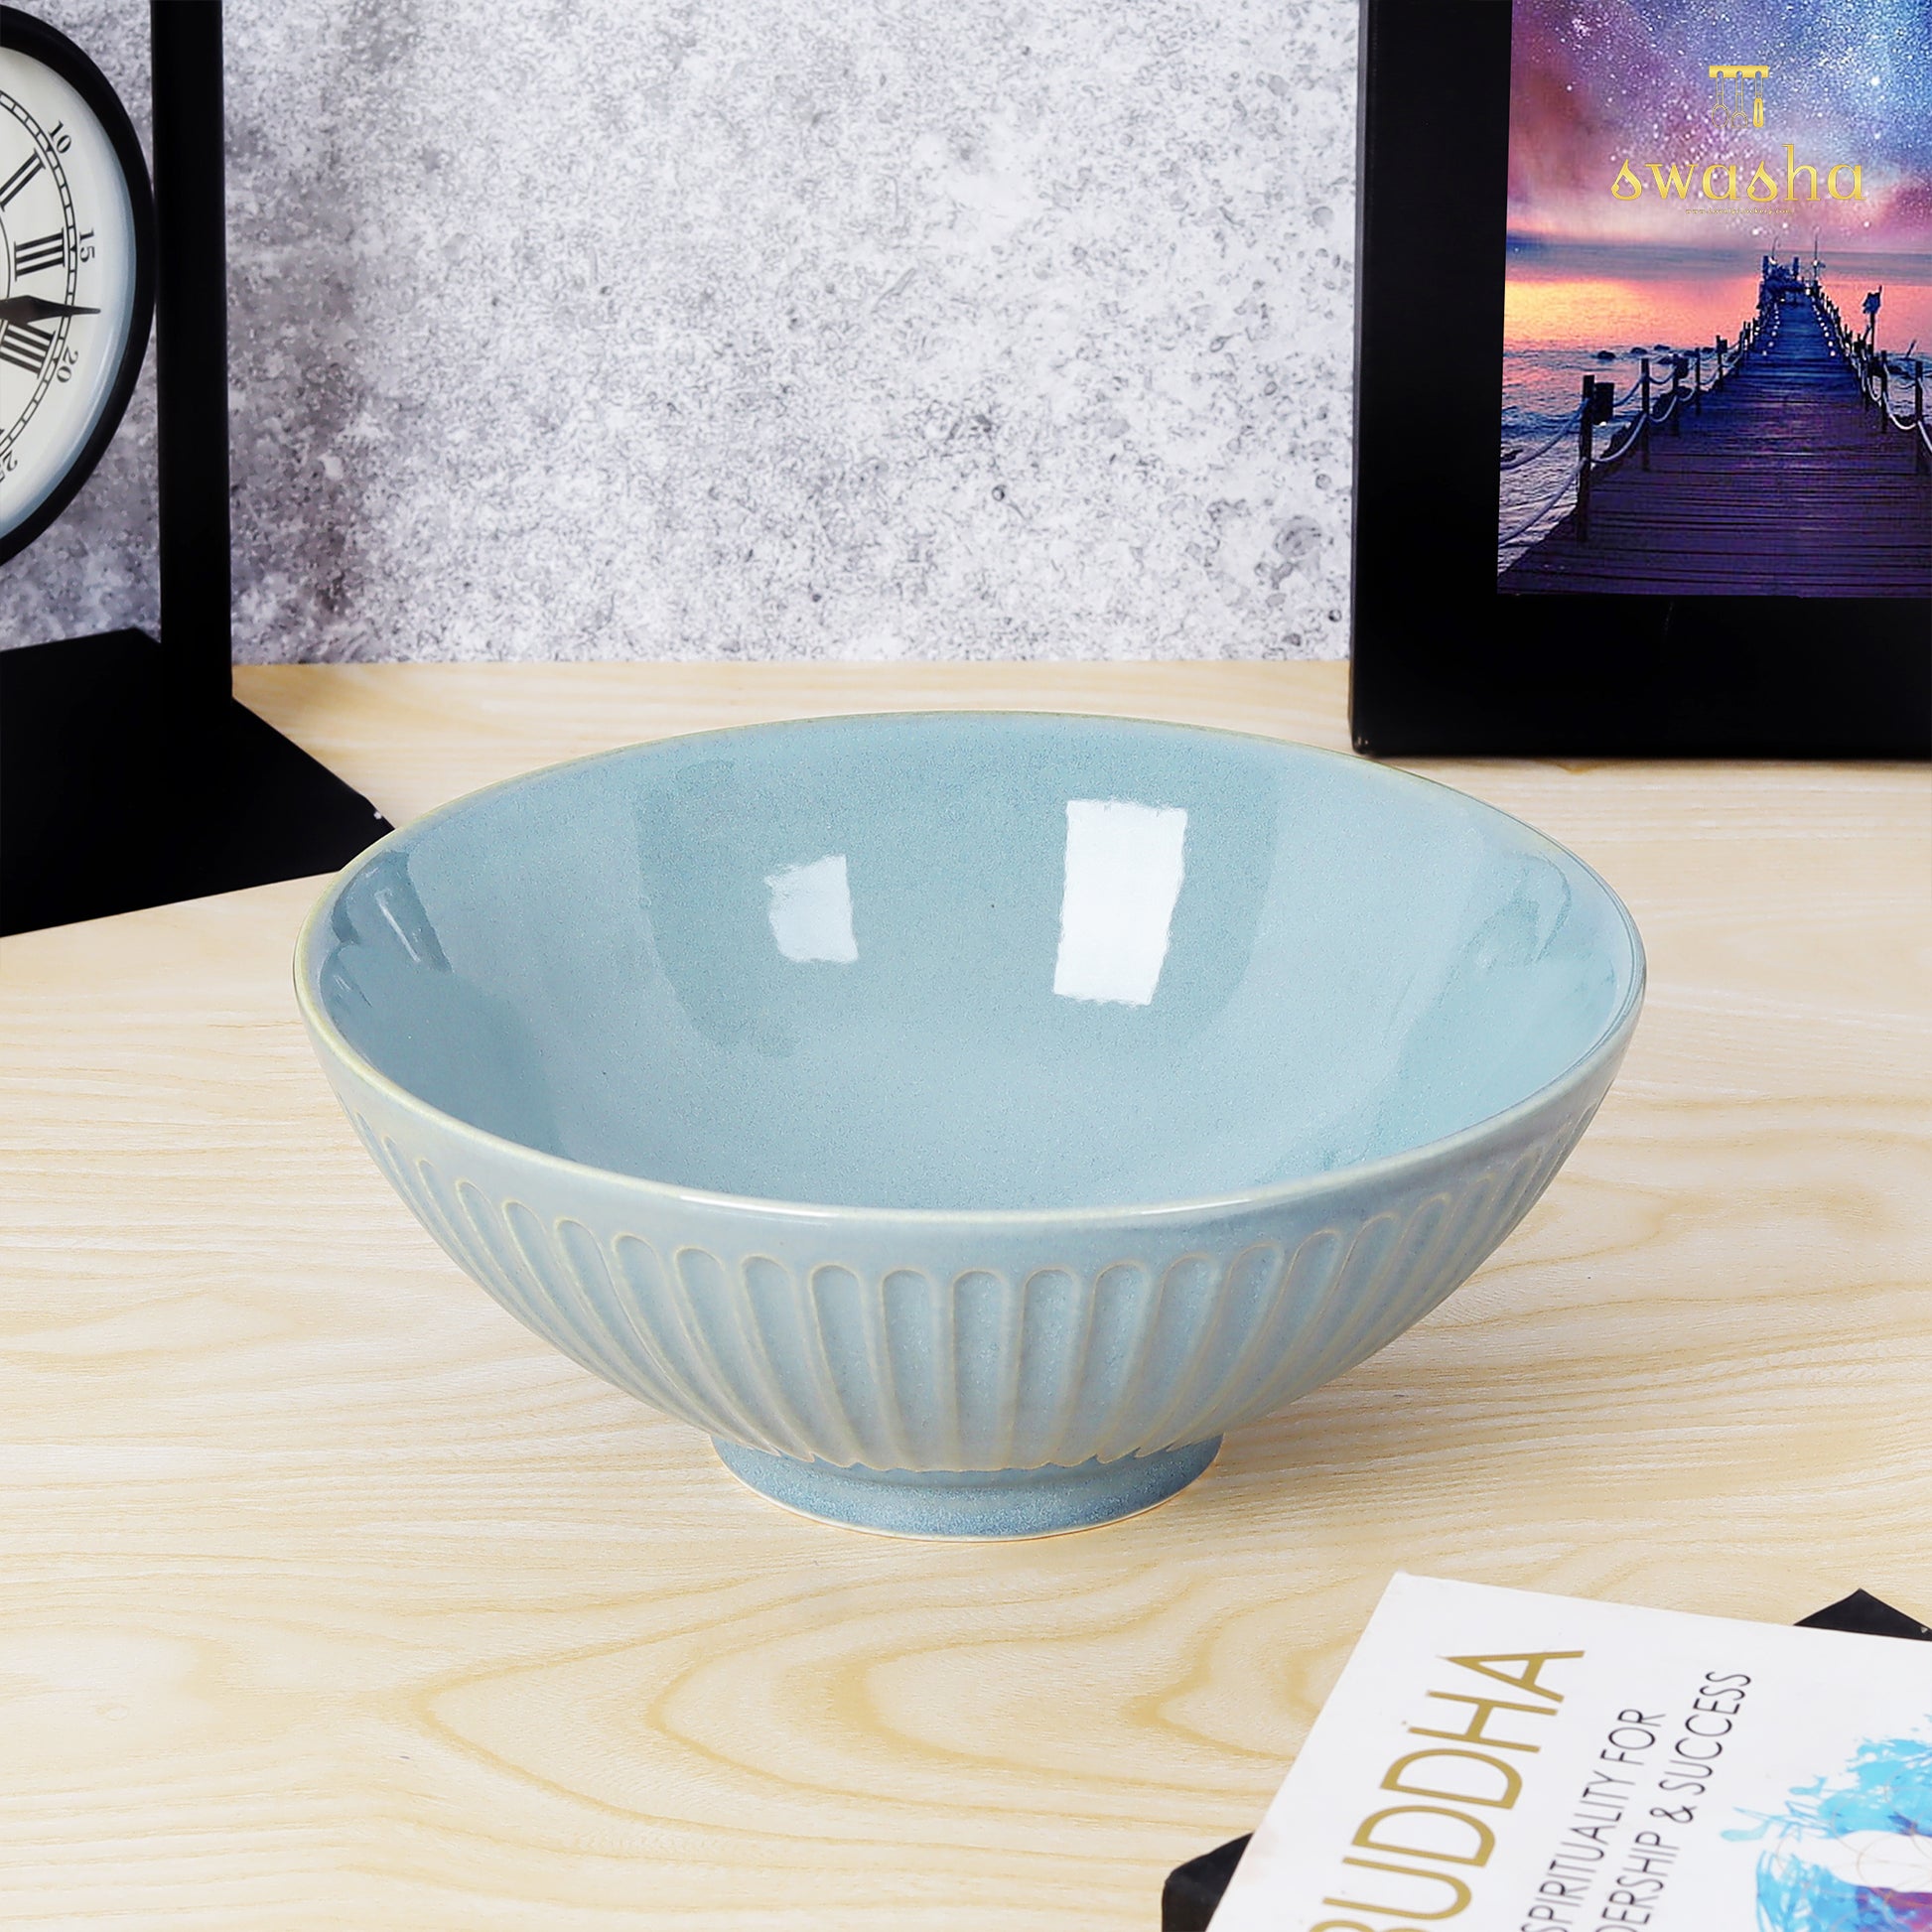 Charming ceramic snacks bowl - ideal for delightful munching moments